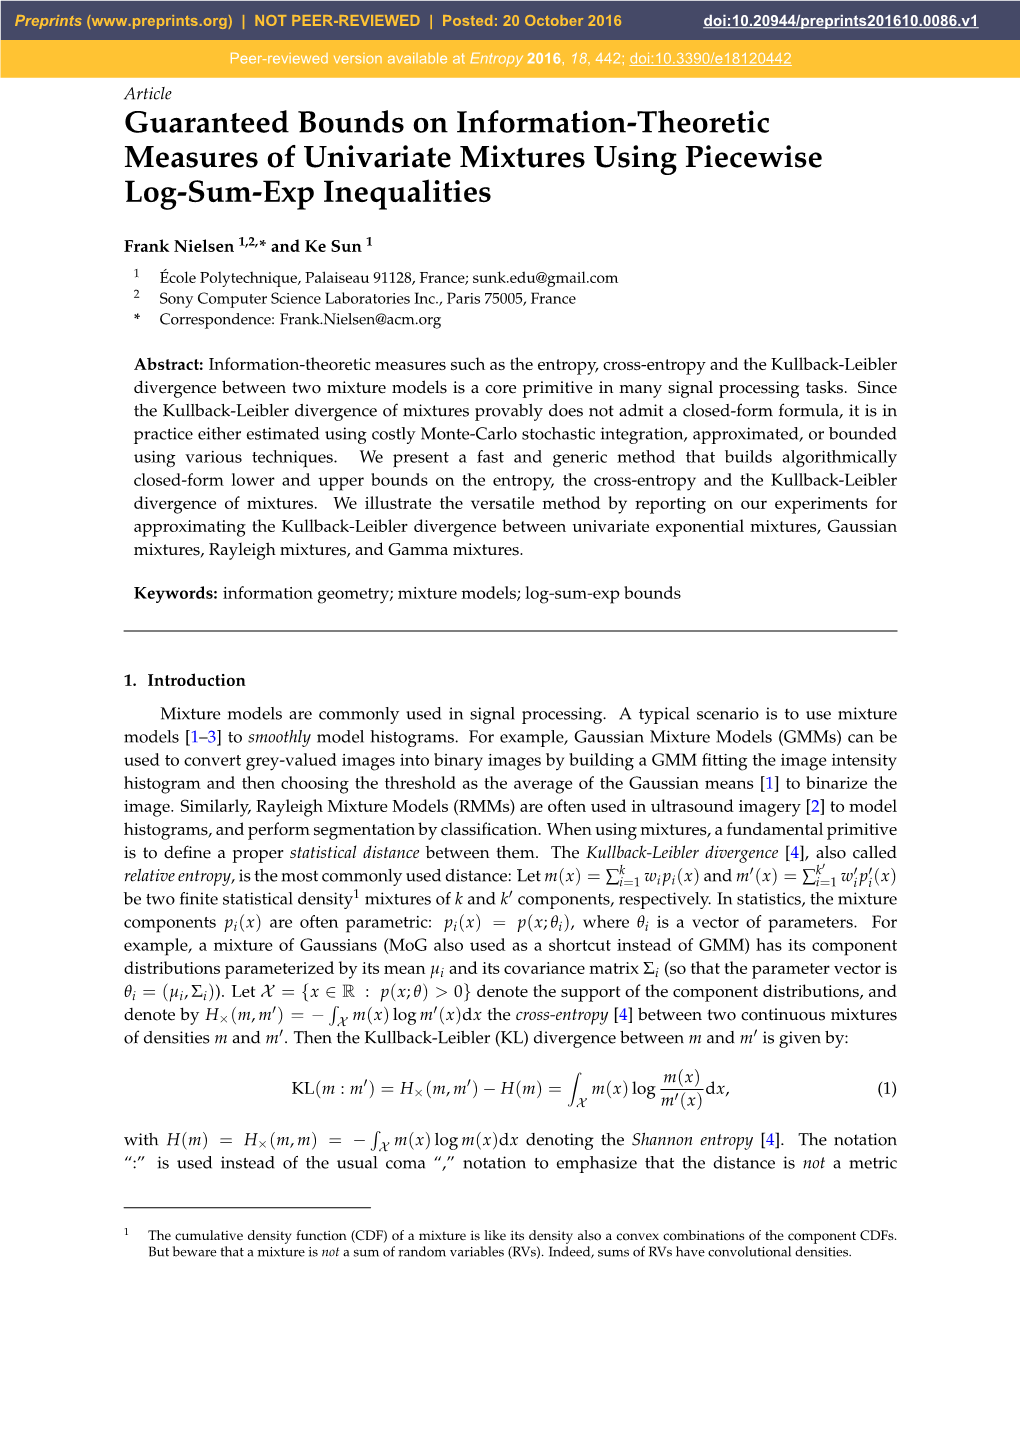 Guaranteed Bounds on Information-Theoretic Measures of Univariate Mixtures Using Piecewise Log-Sum-Exp Inequalities